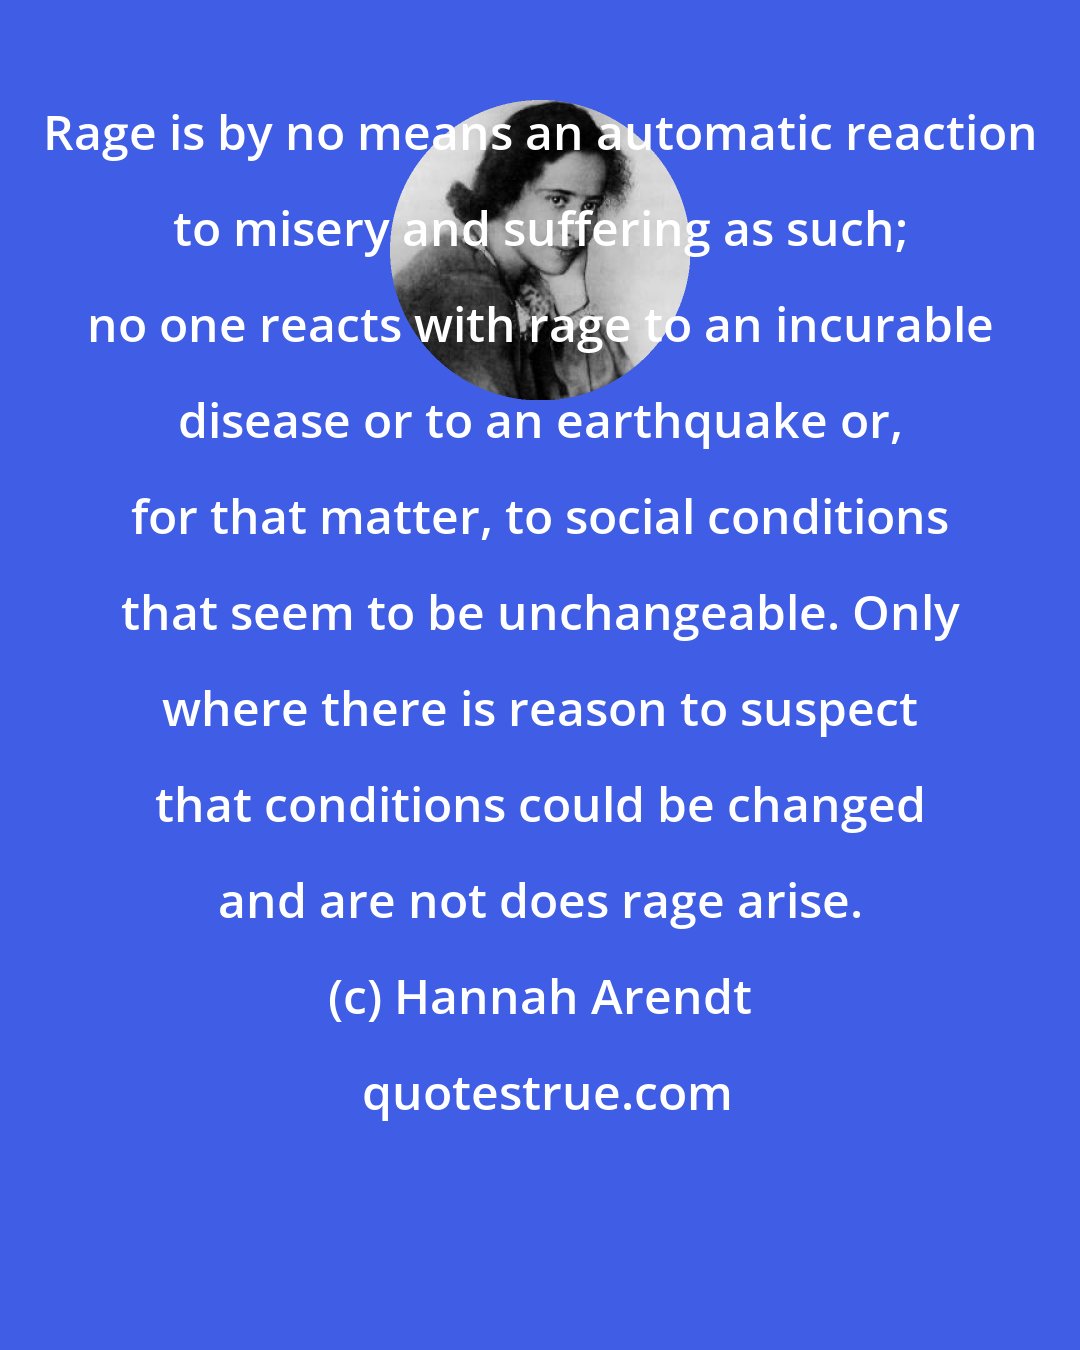 Hannah Arendt: Rage is by no means an automatic reaction to misery and suffering as such; no one reacts with rage to an incurable disease or to an earthquake or, for that matter, to social conditions that seem to be unchangeable. Only where there is reason to suspect that conditions could be changed and are not does rage arise.